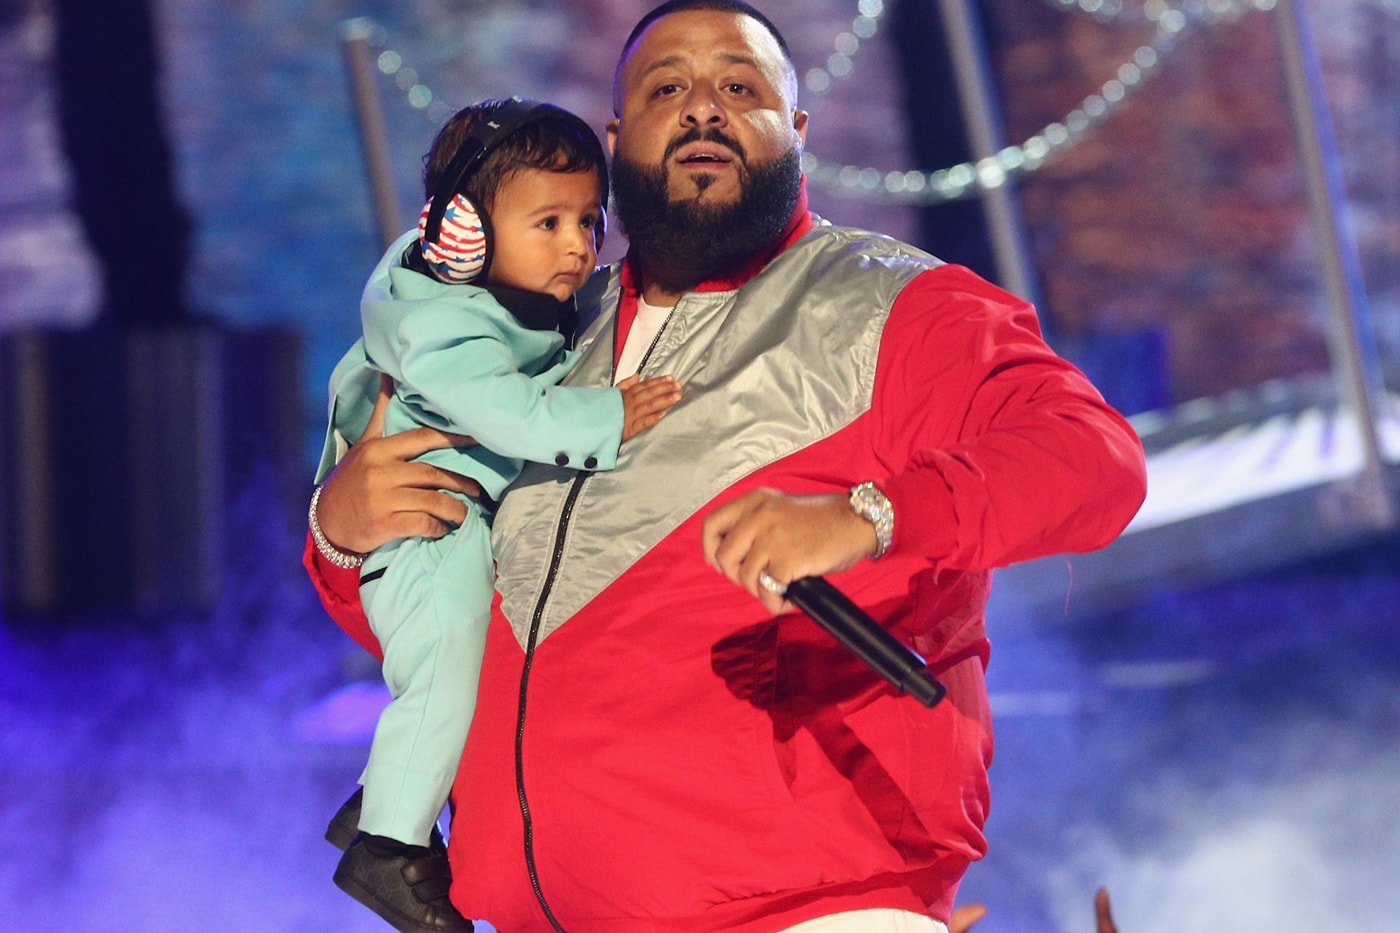 dj-khaled-graces-the-cover-bloomberg-businessweek